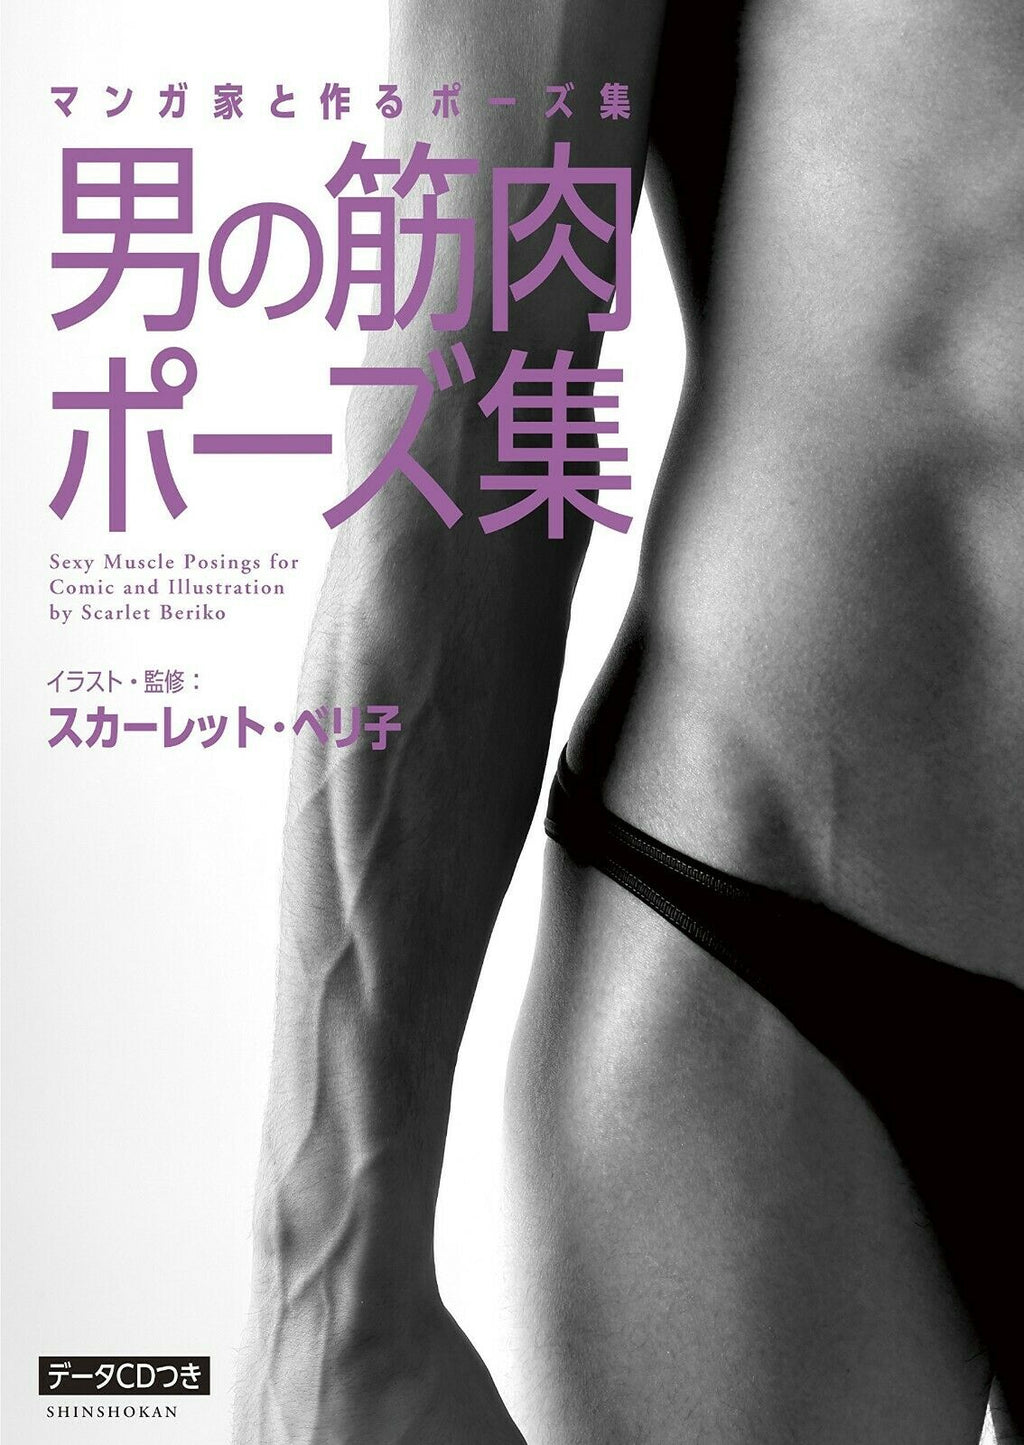 NEW' How To Draw Manga Anime Men's Muscle Pose Book w/CD-ROM | Japan Art